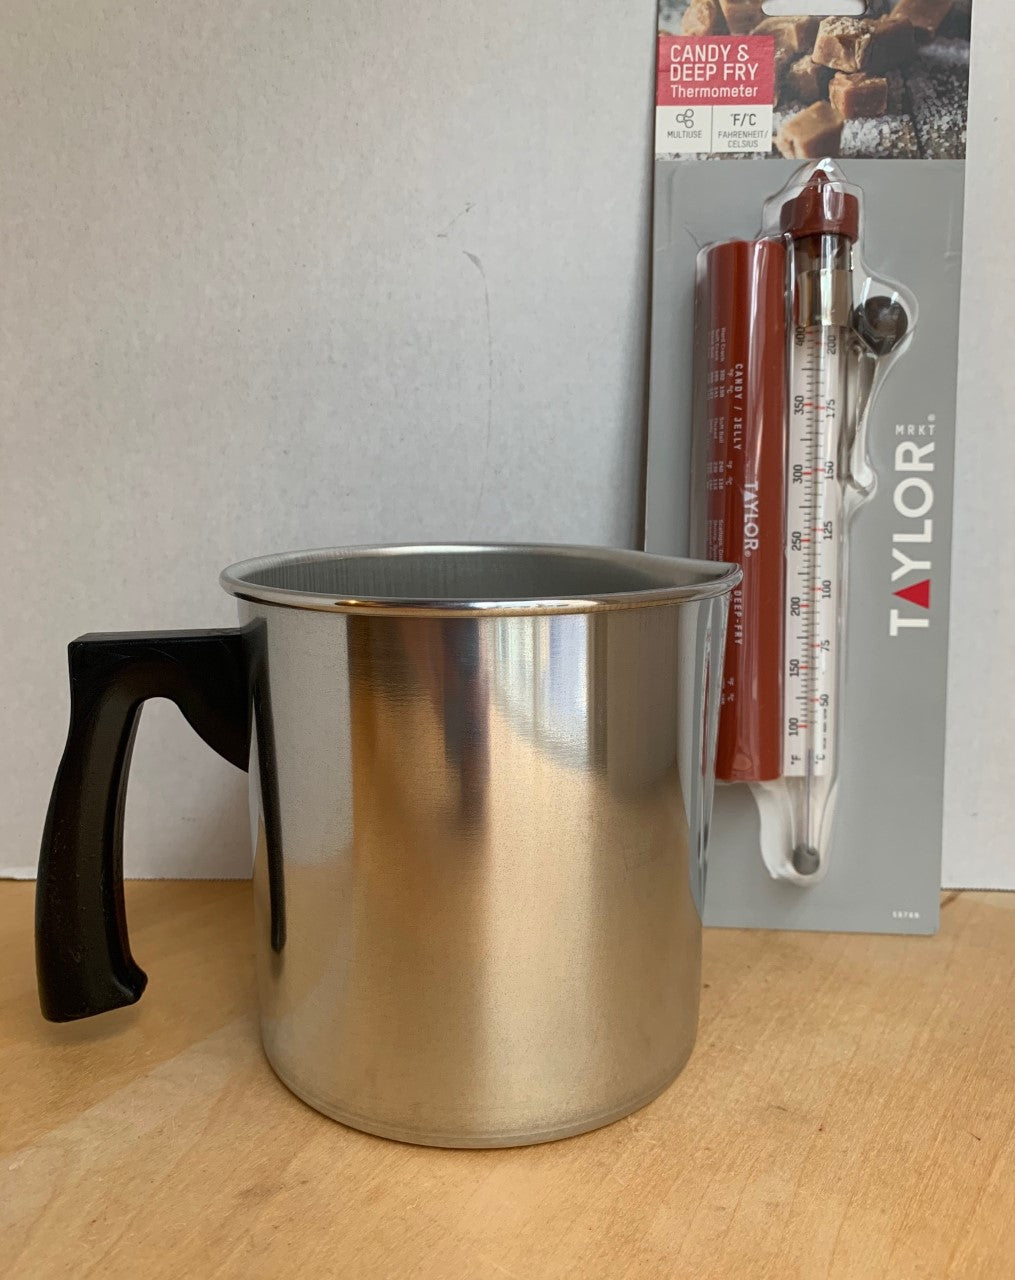 1lb Melting Pouring Pot & Thermometer for Candle Making